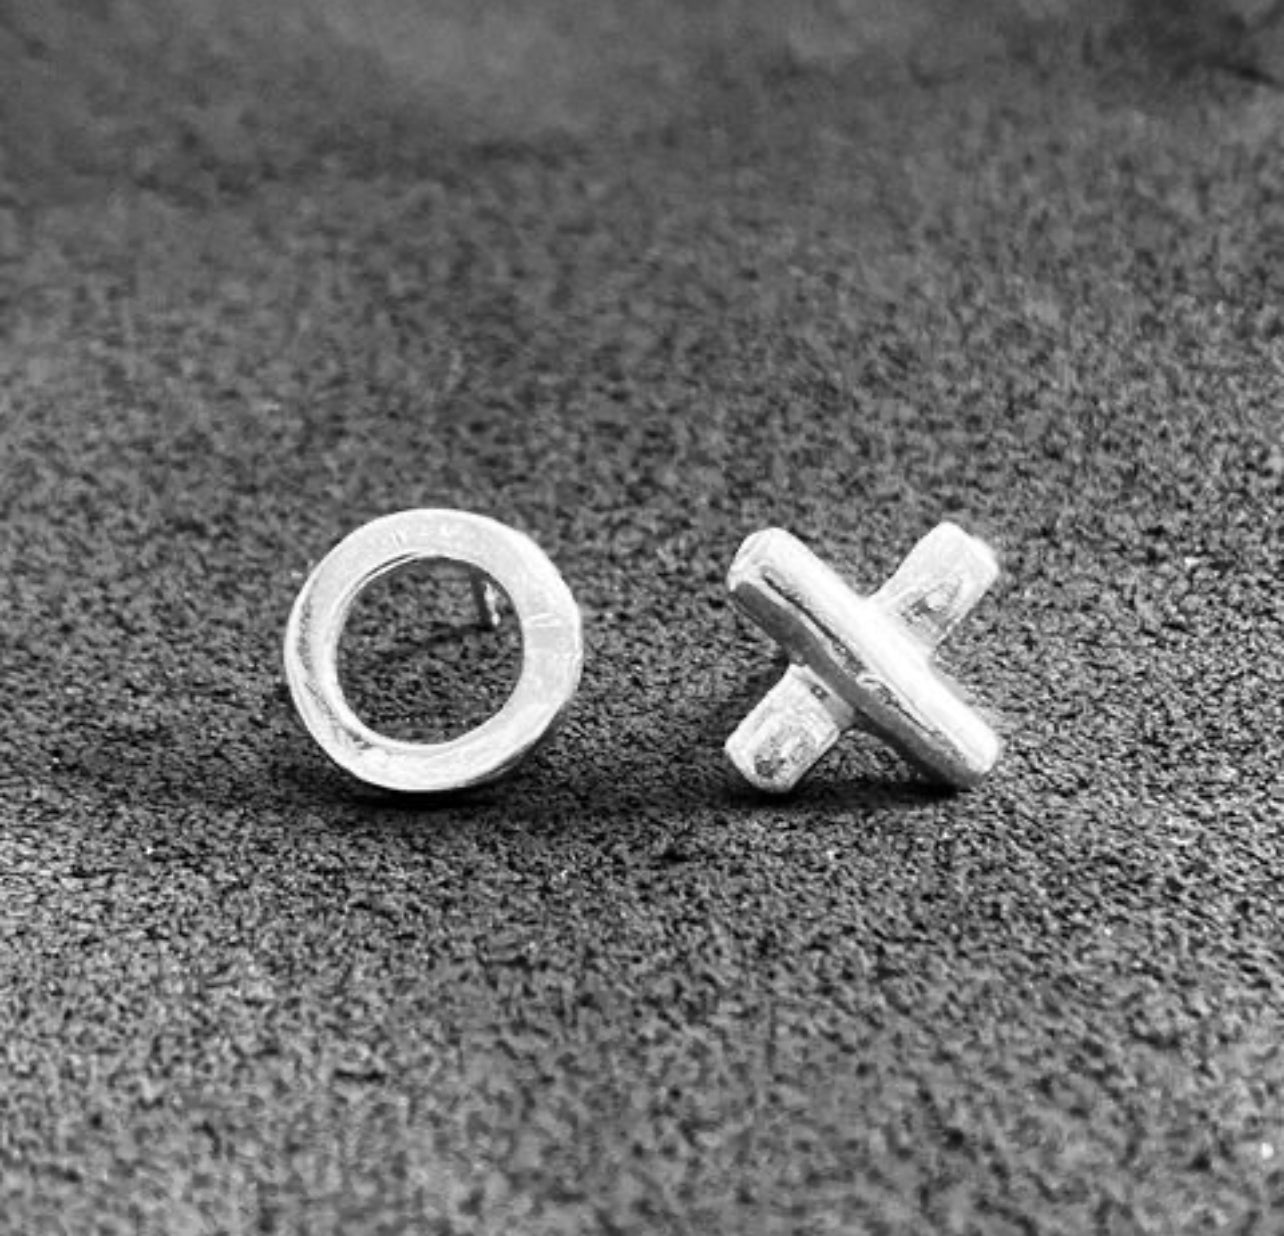 A product shot of the "XO" configuration of the tic-tac-toe earring to show relative size comparison of the two.